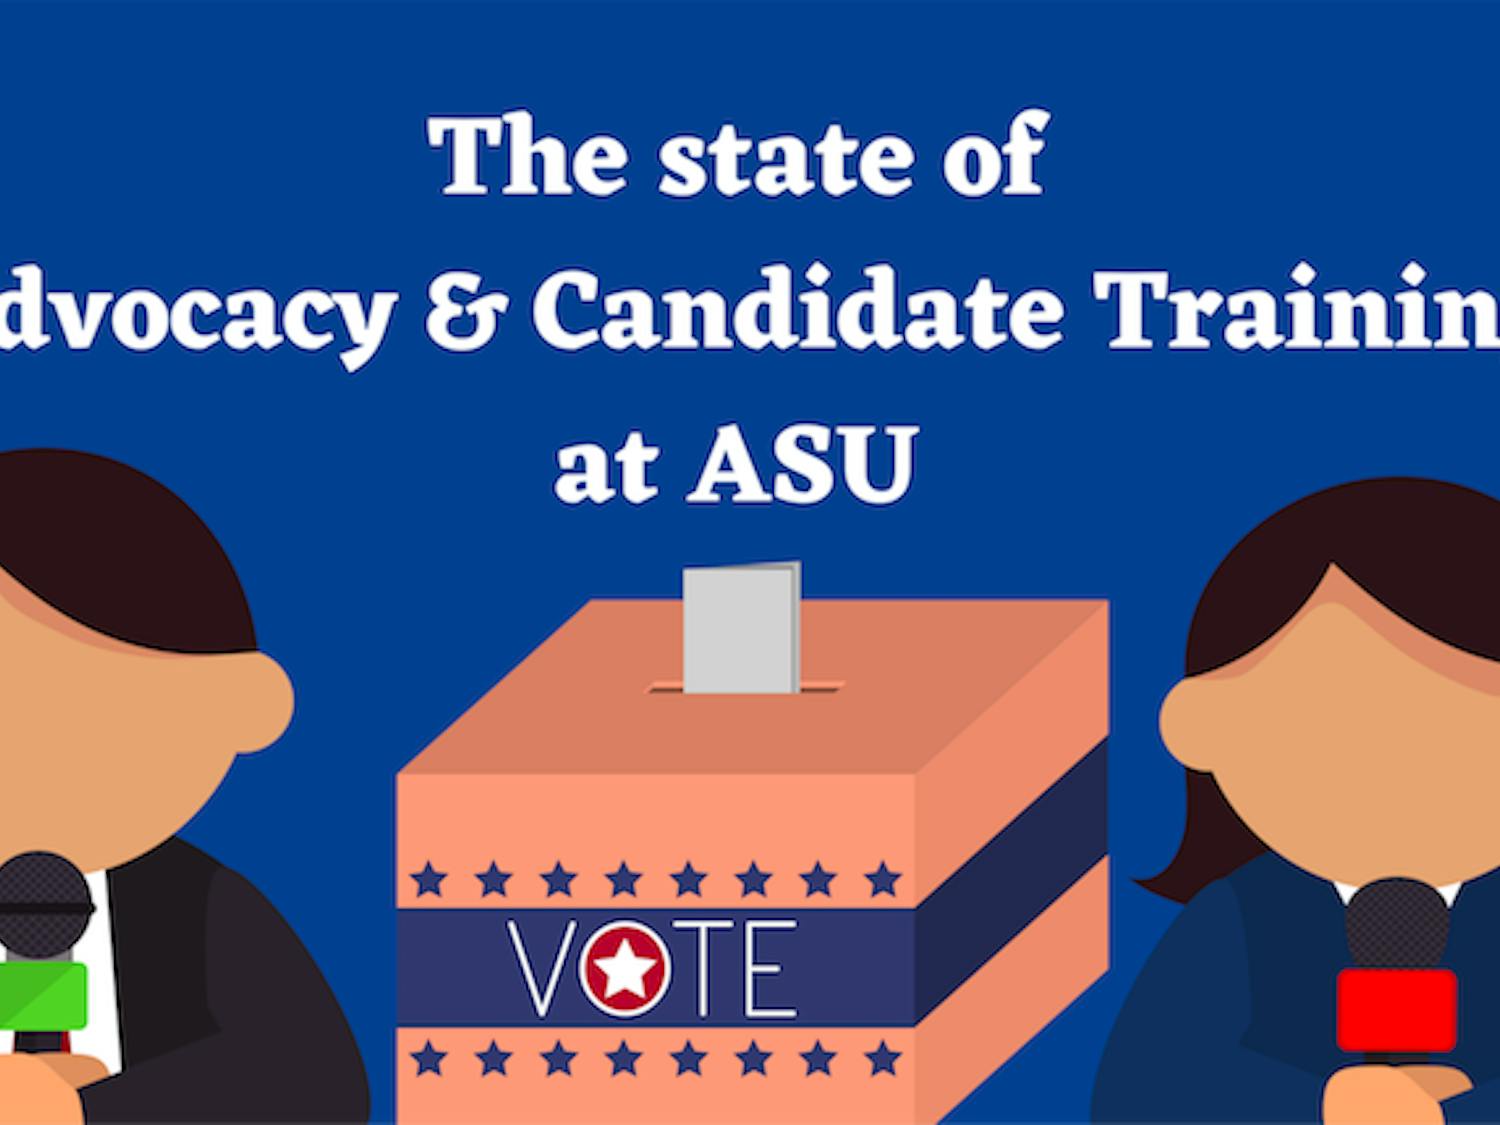 ASU has several programs aimed at increasing civic engagement, but social work students want one specifically for undergraduate students.